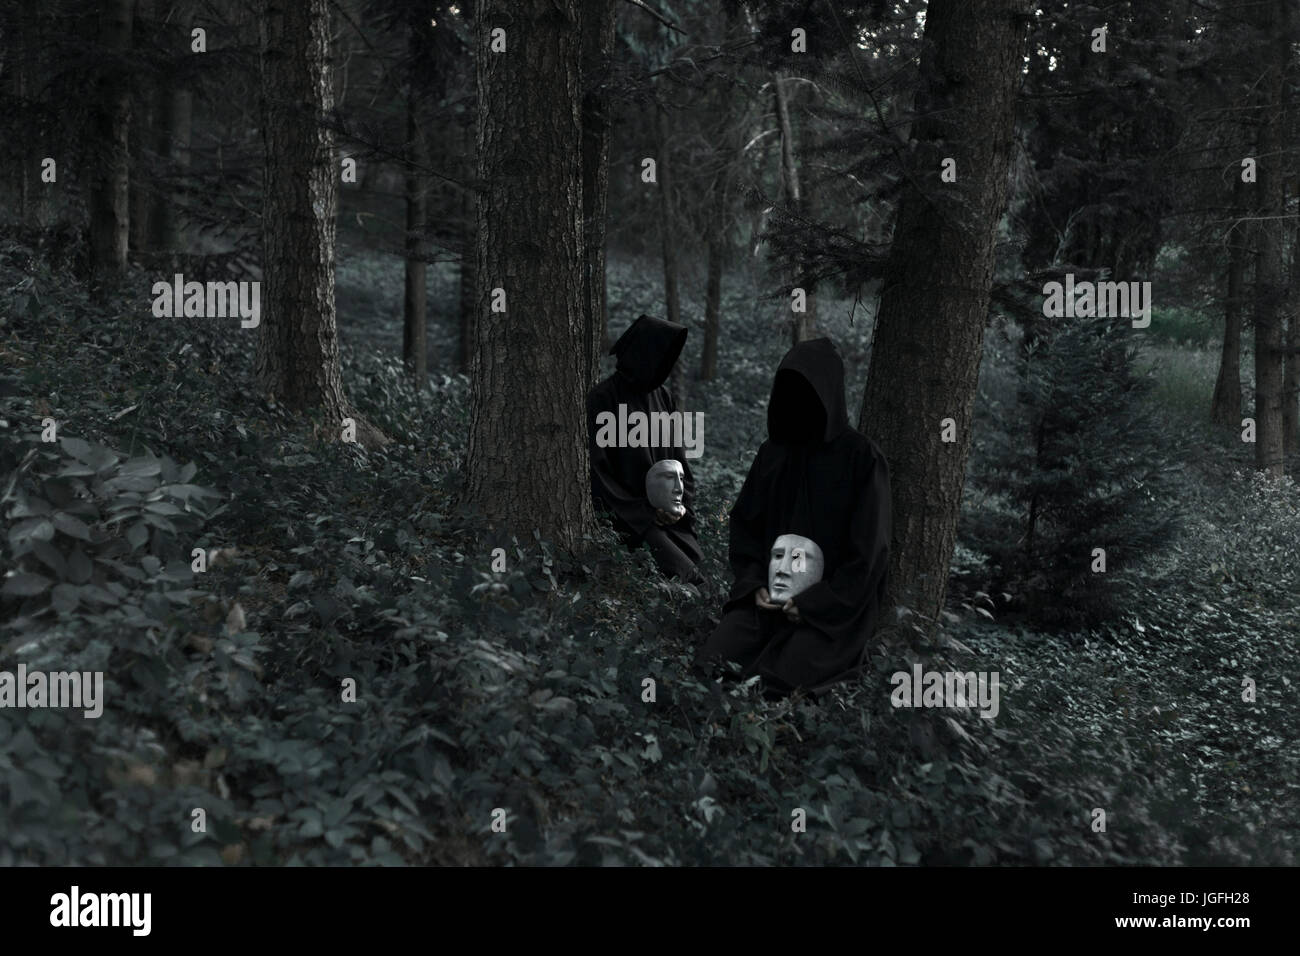 People wearing black robes and holding white masks sitting in forest Stock Photo